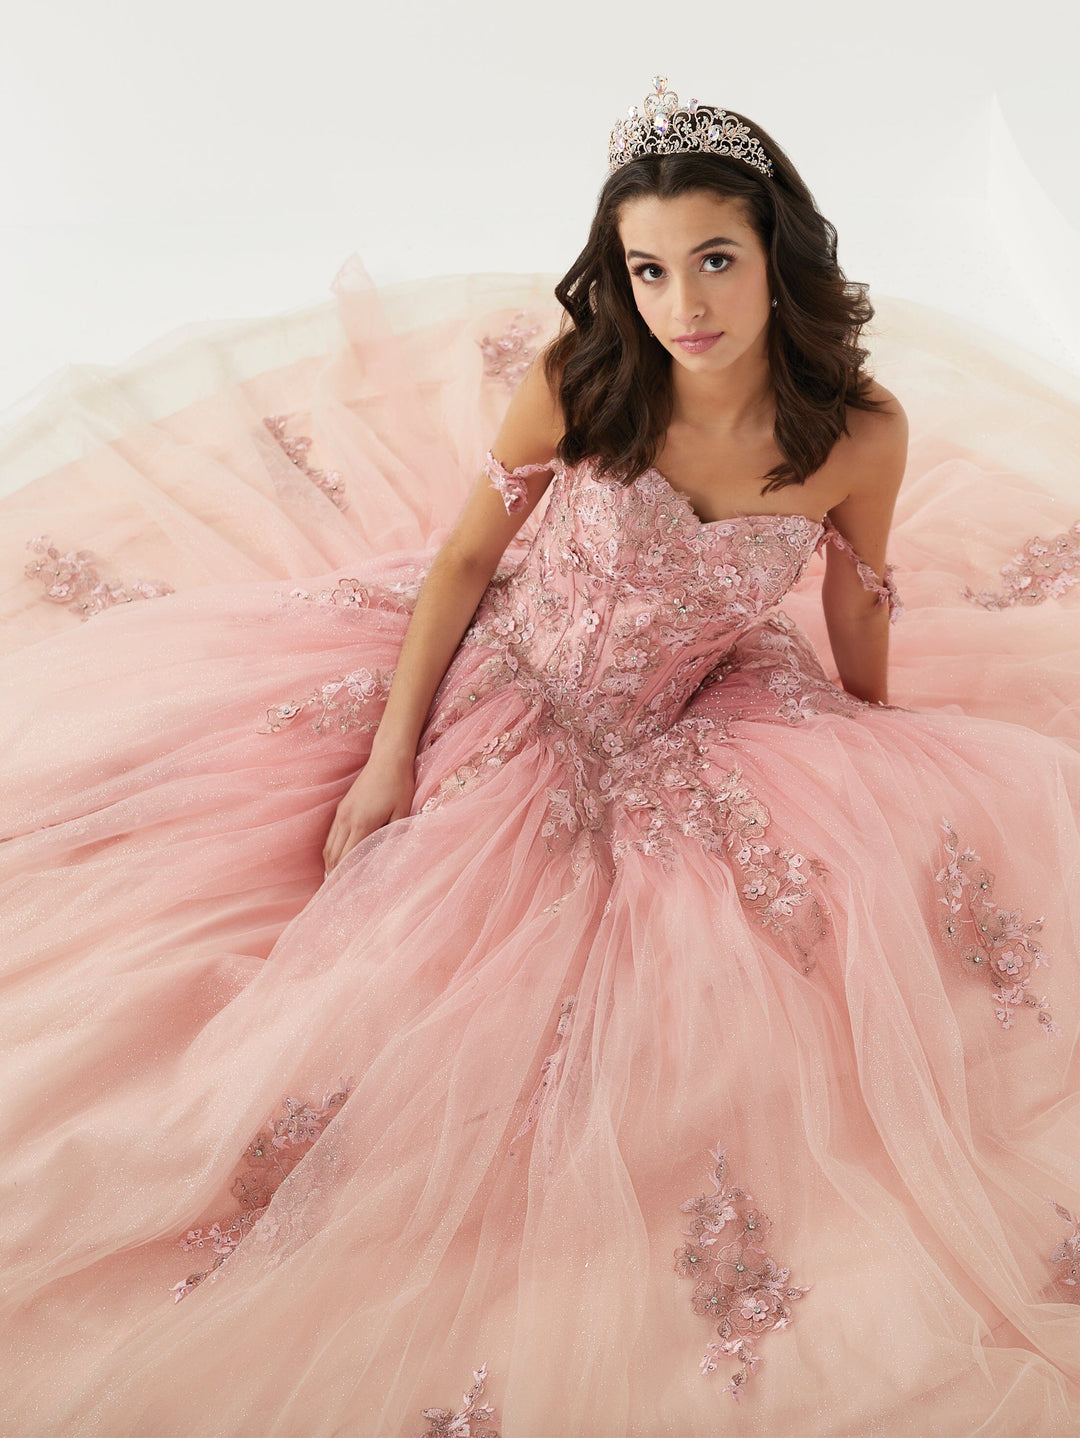 Applique Ombre Quinceanera Dress by Fiesta Gowns 56470